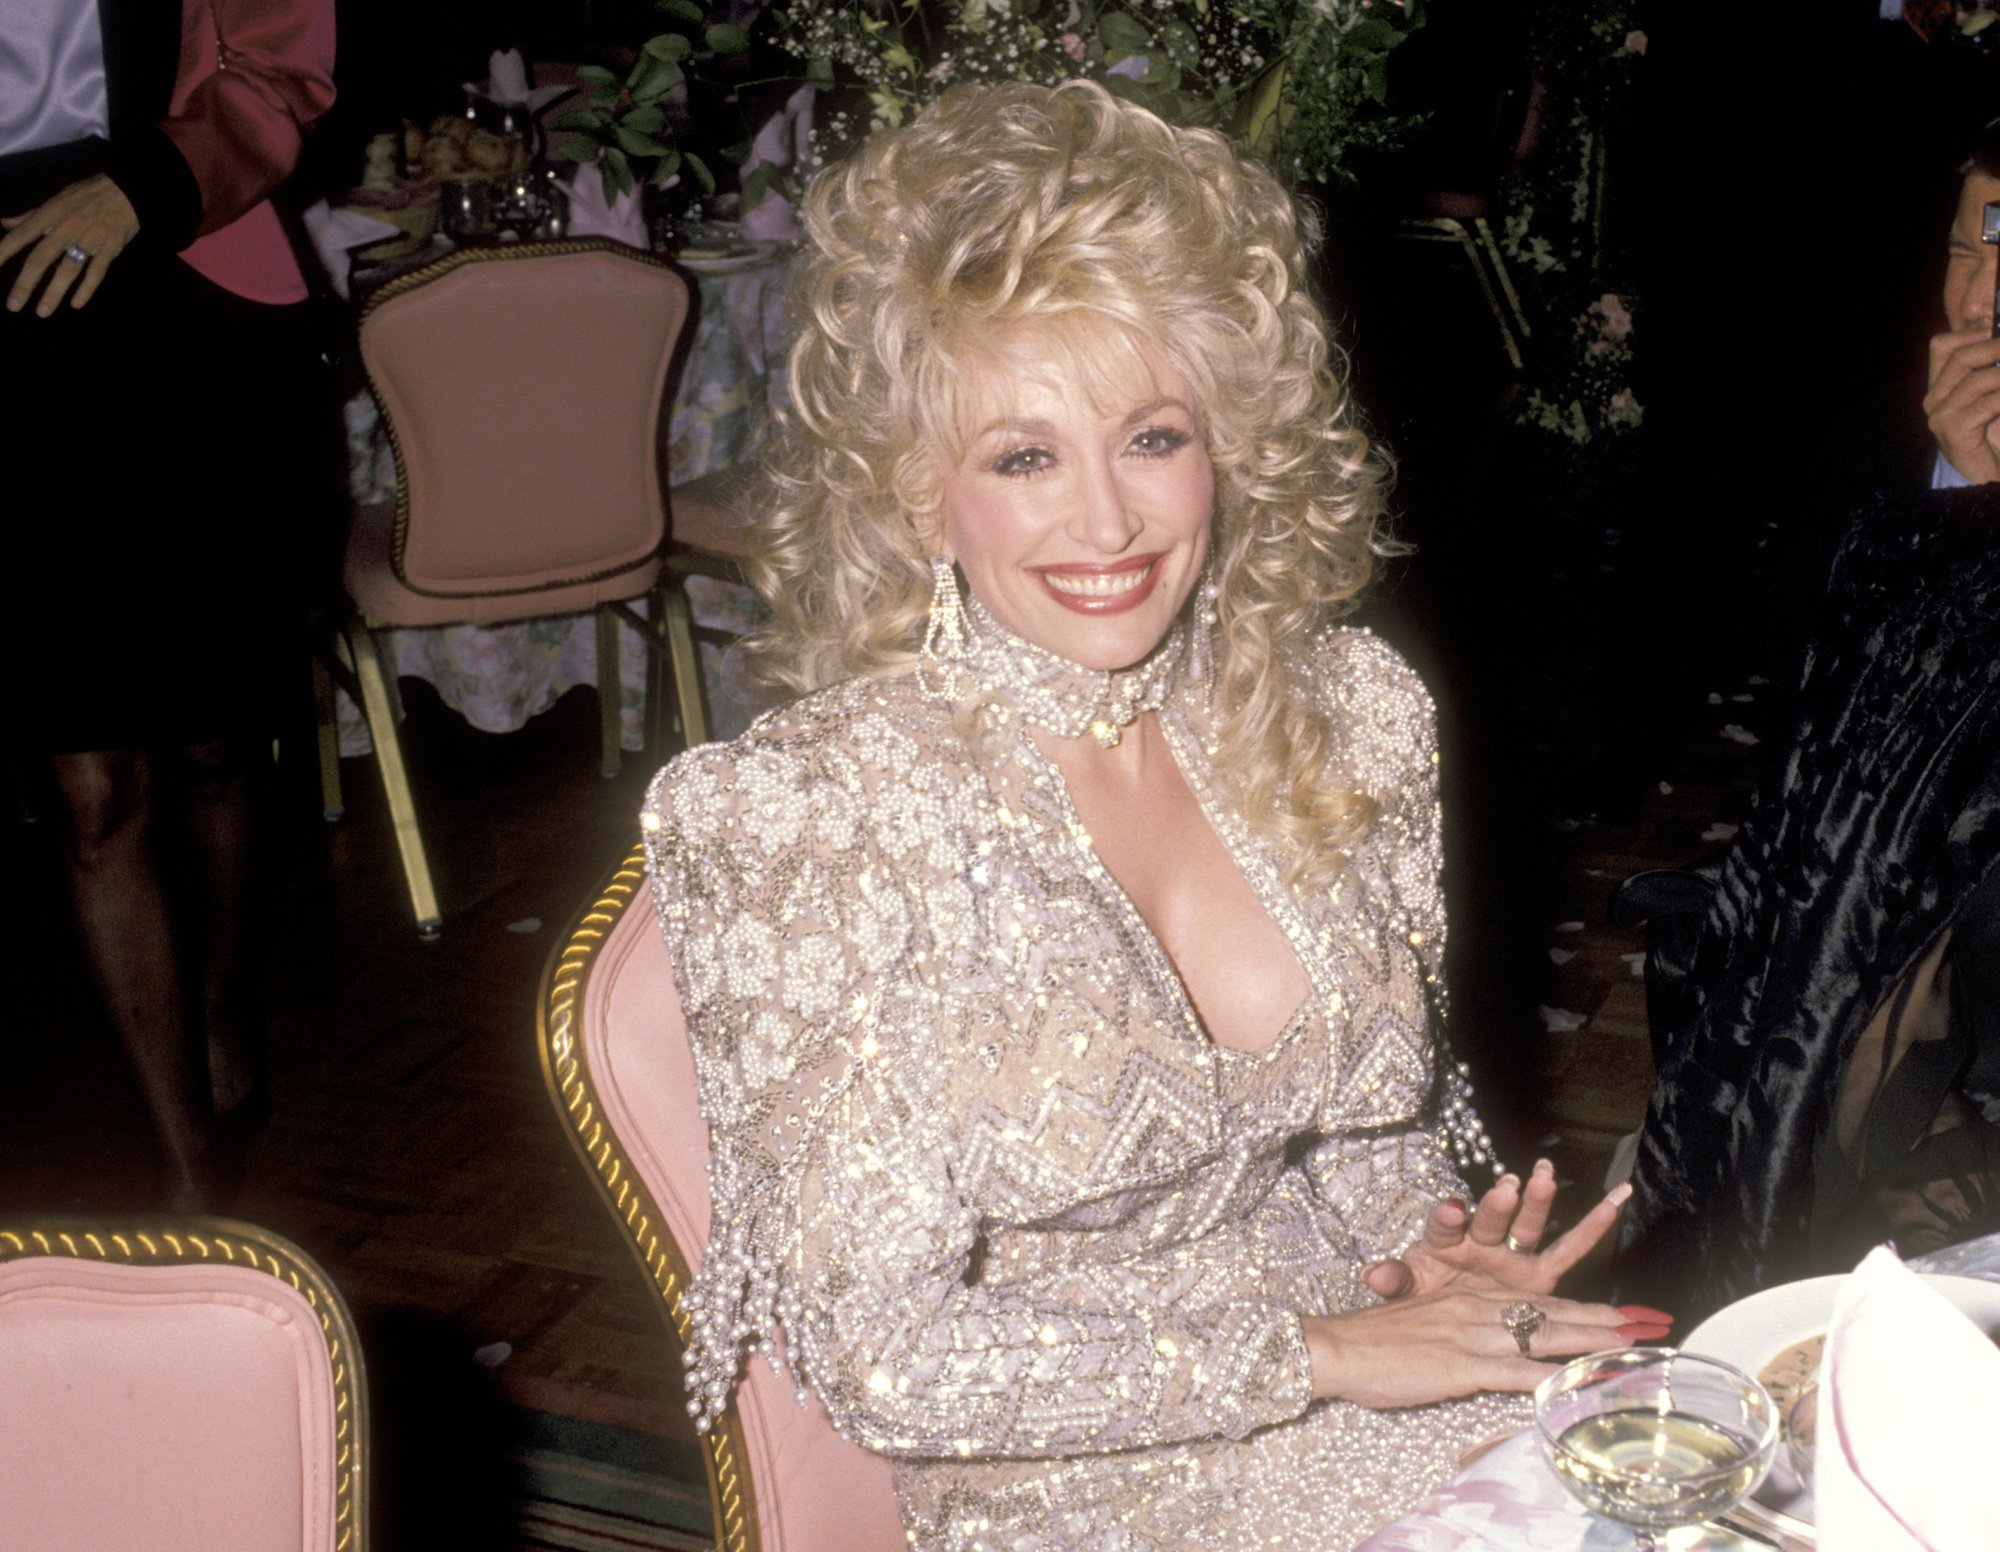 Before and After Photos of Dolly Parton's Plastic Surgery